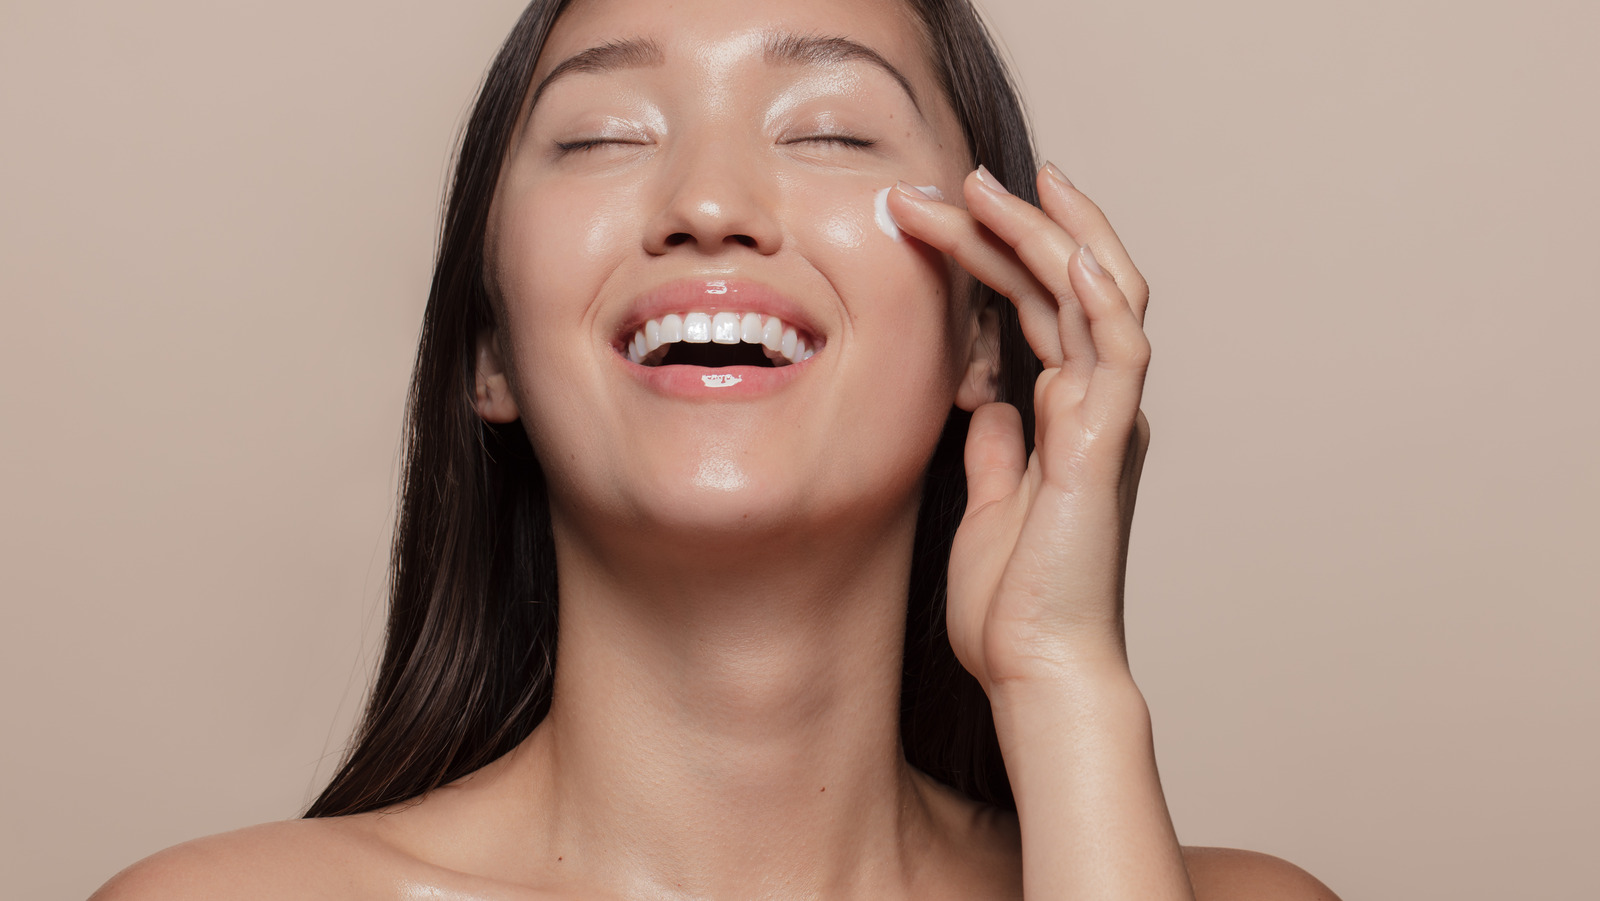 Here's How To Achieve The 'Glass Skin' Trend